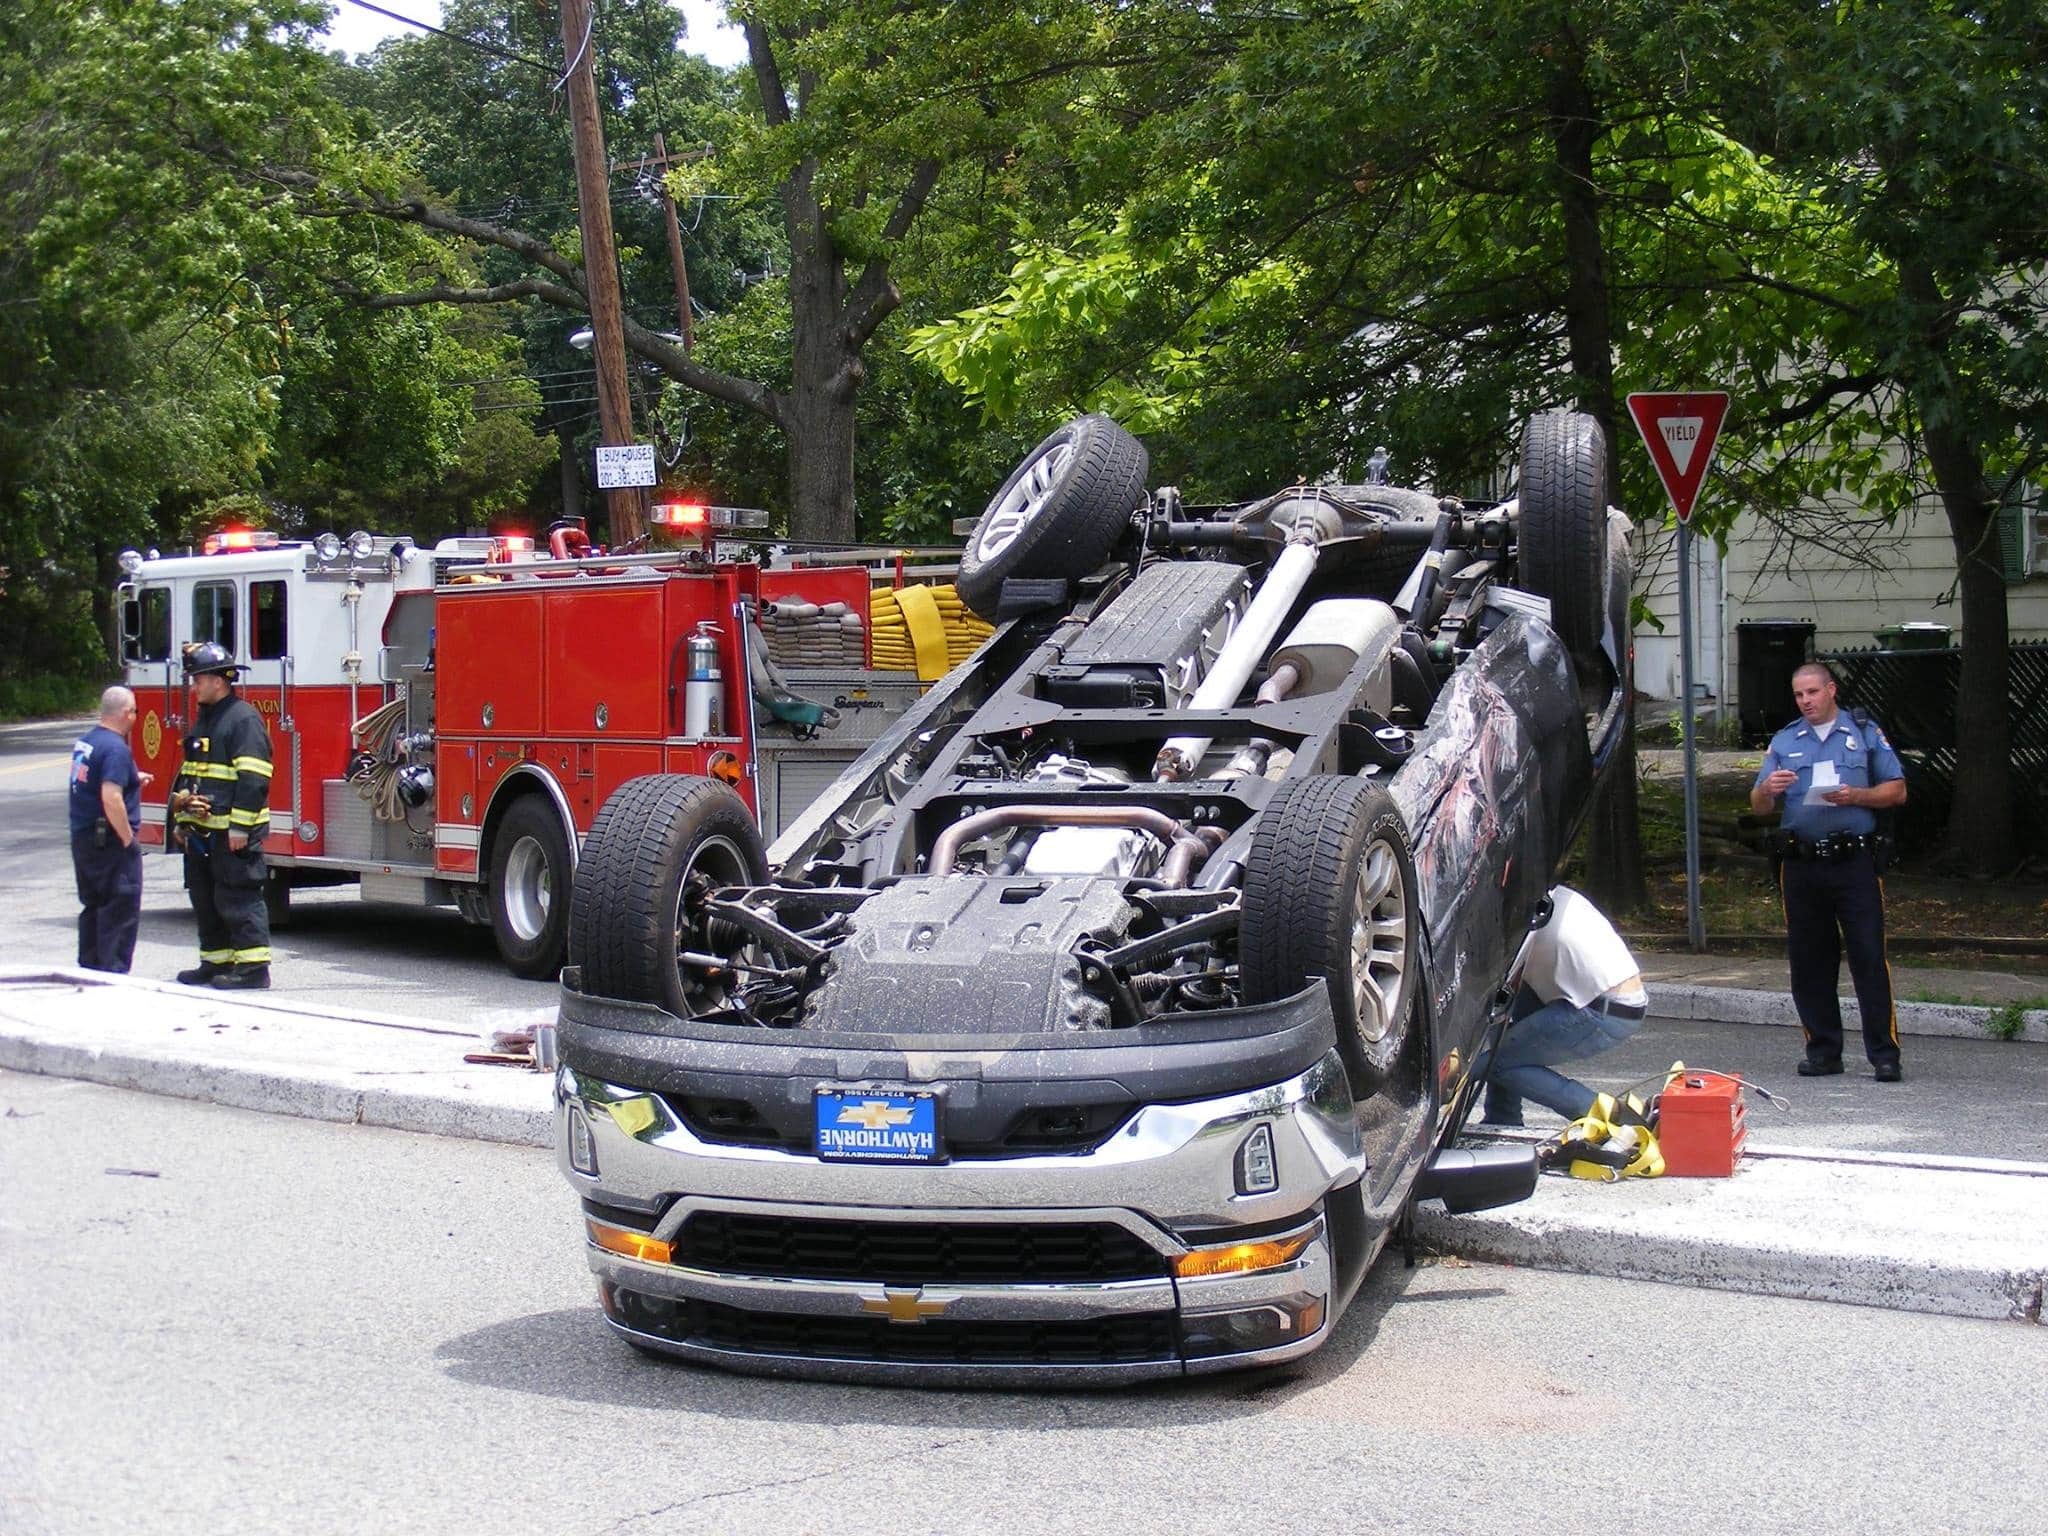 Ridgewood Police and Fire Respond with Paramus Police and Fire to Linwood Avenue Accident